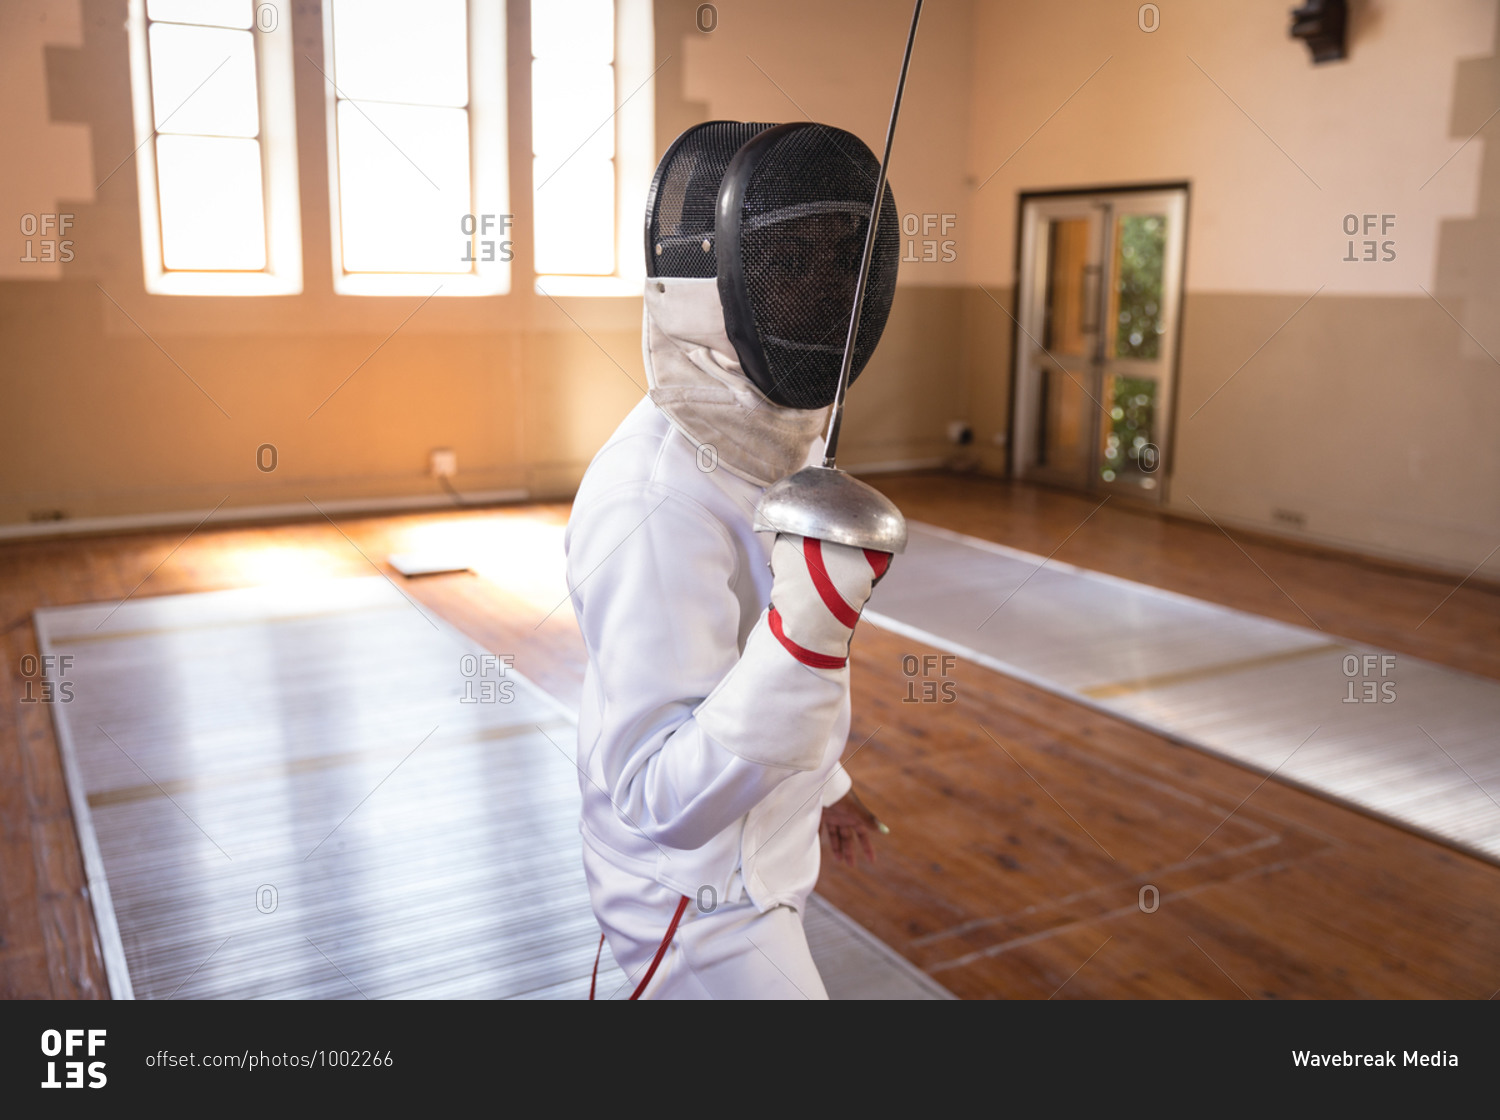 Caucasian sportswoman wearing protective fencing outfit during a fencing training session, preparing for a duel, holding an epee in front of face. Fencers training at a gym.